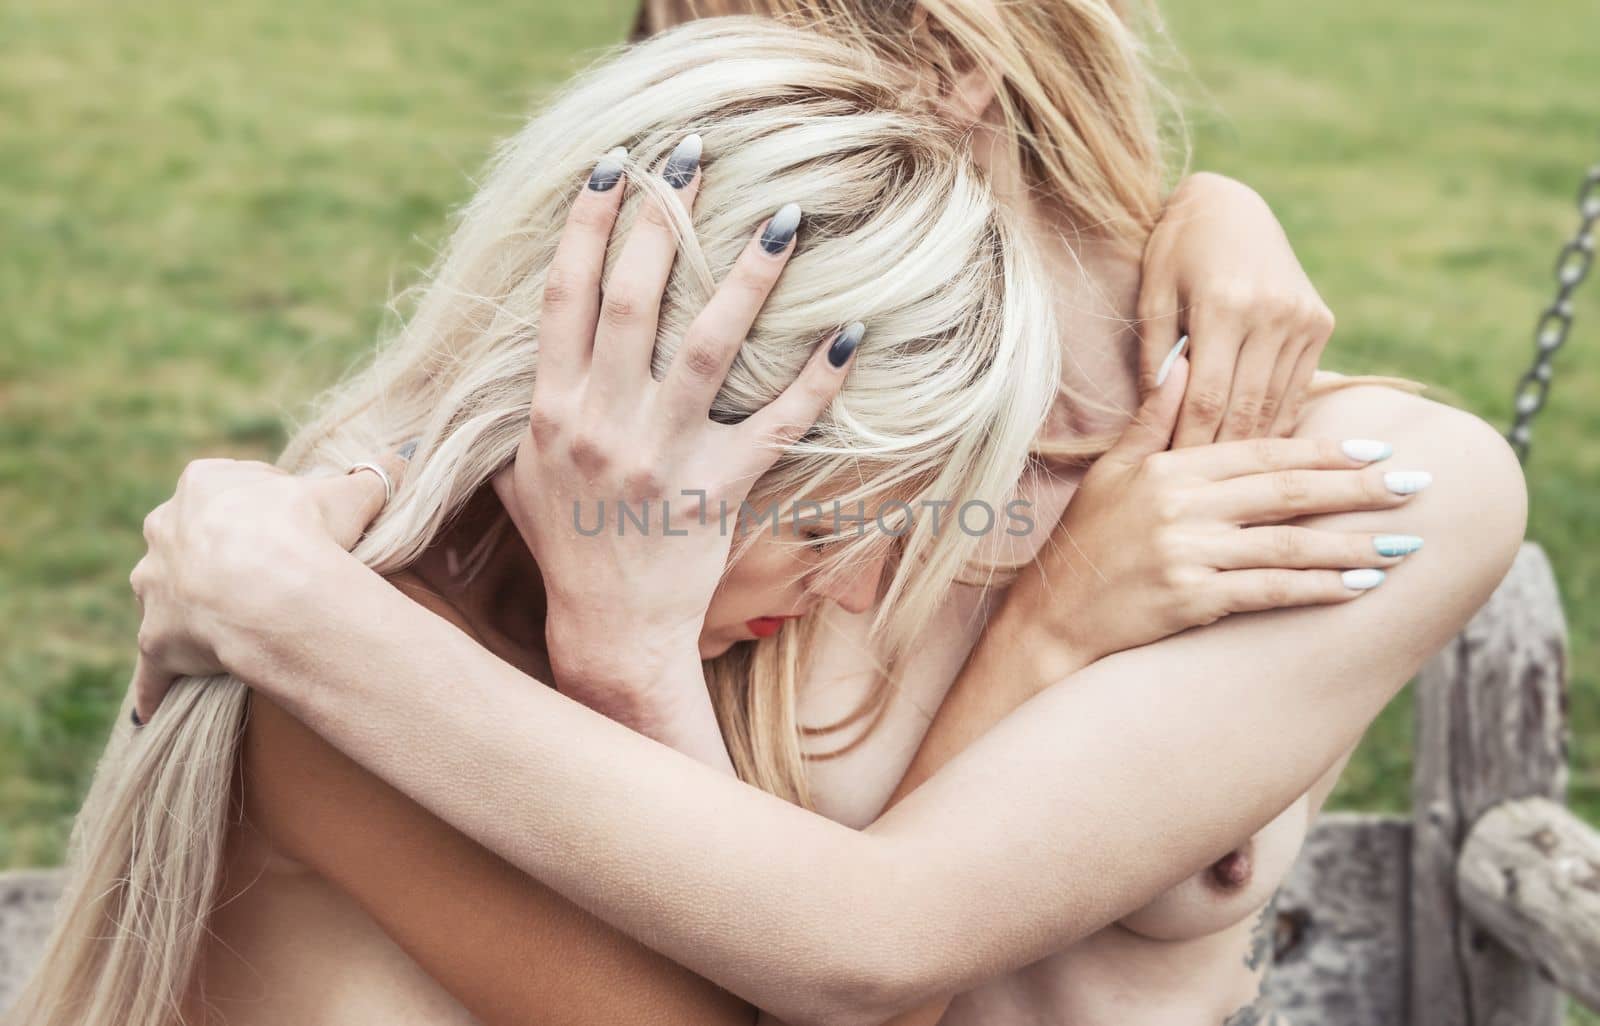 Intimate embrace between two young nude women, expressing love and passion. Romantic relationship in a tender and passionate moment.